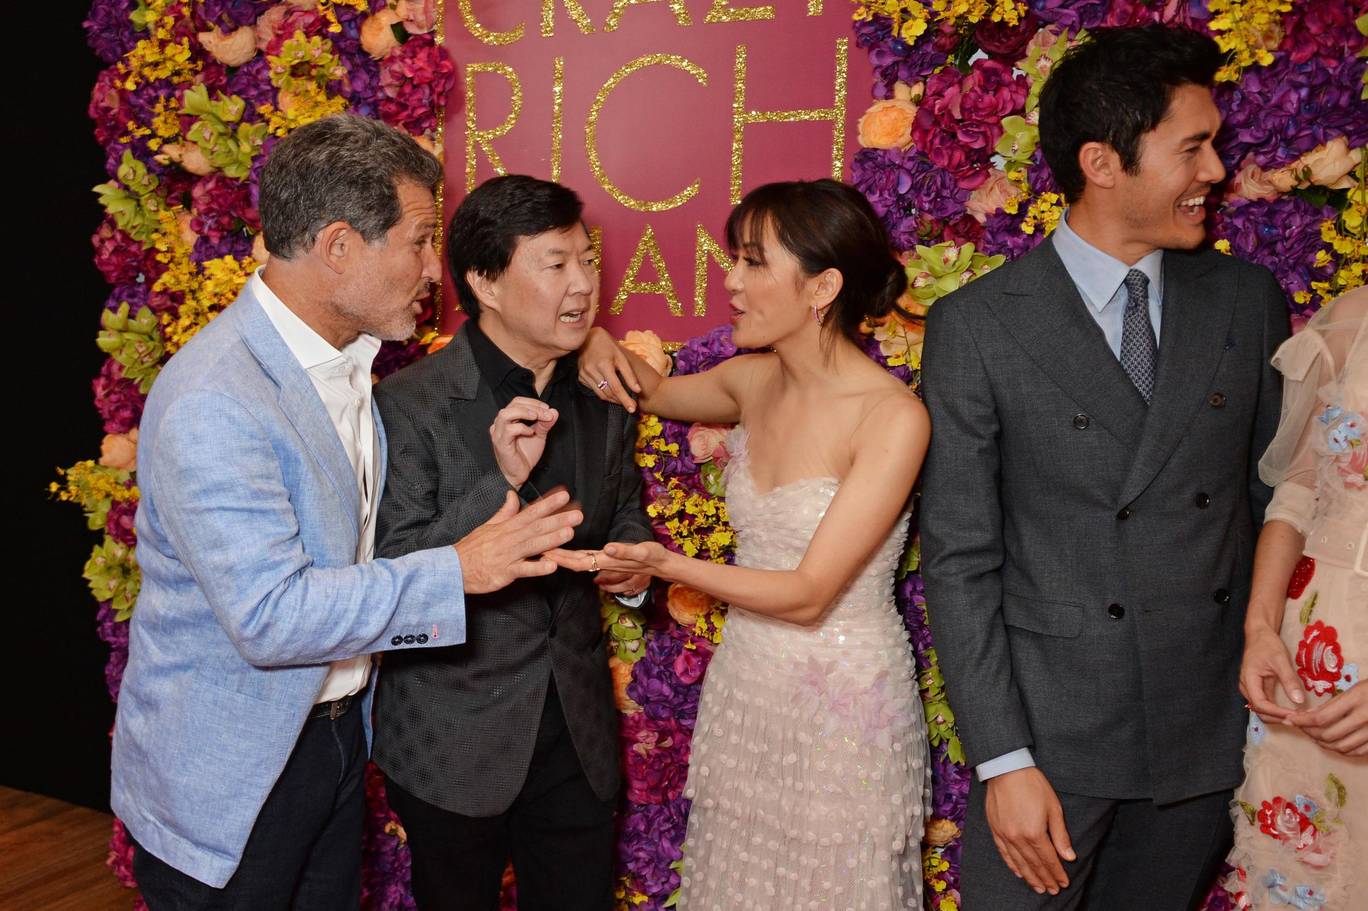   Crazy Rich Asians, in pictures  